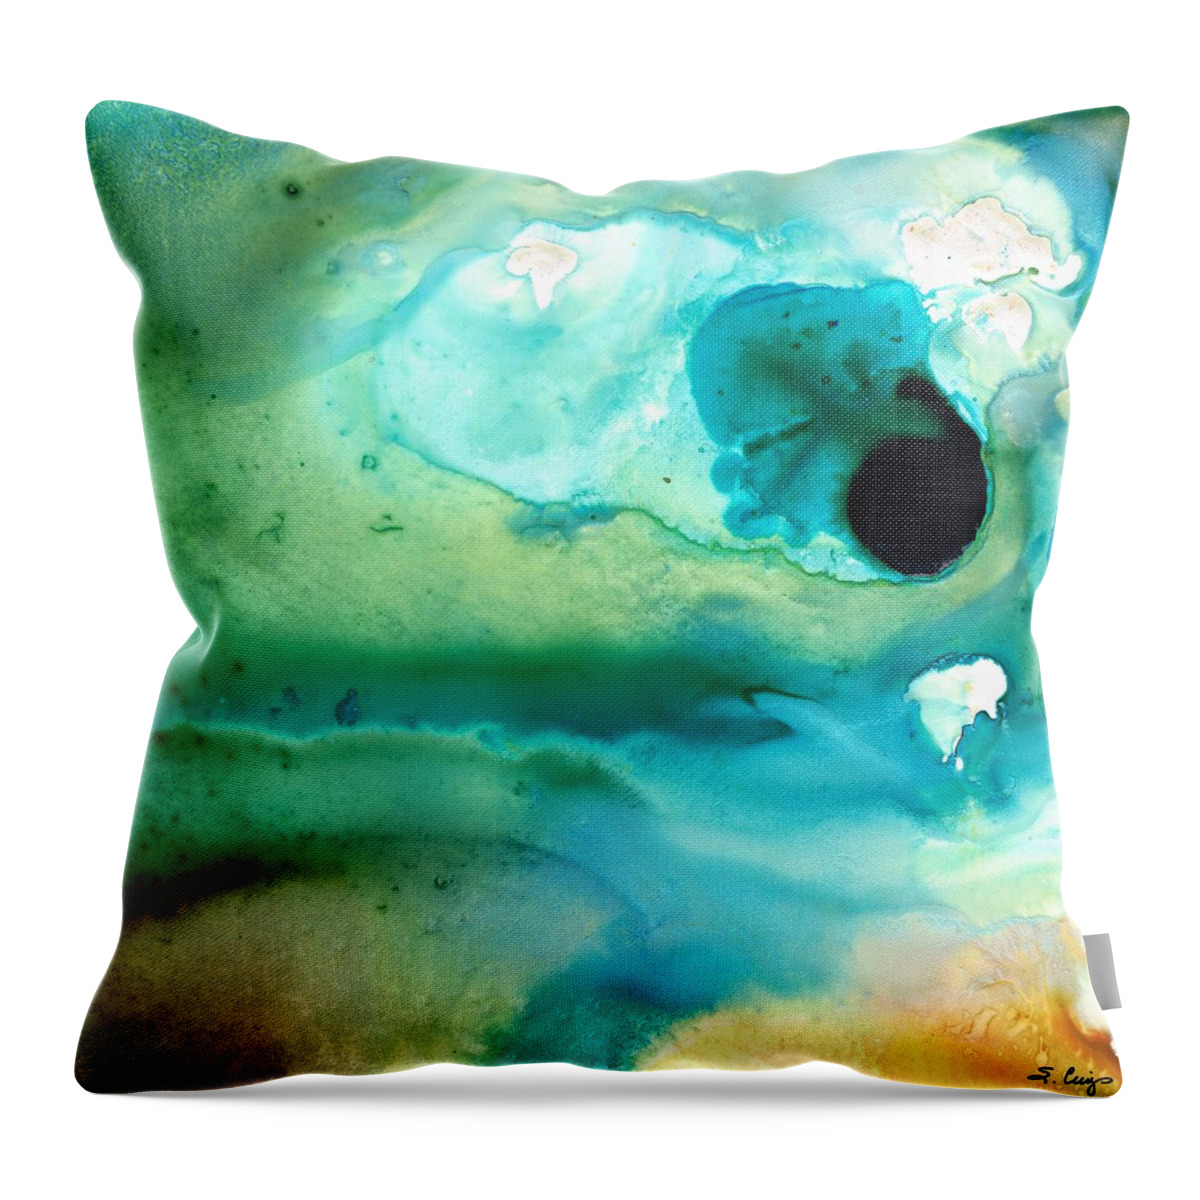 Abstract Throw Pillow featuring the painting Peaceful Understanding by Sharon Cummings